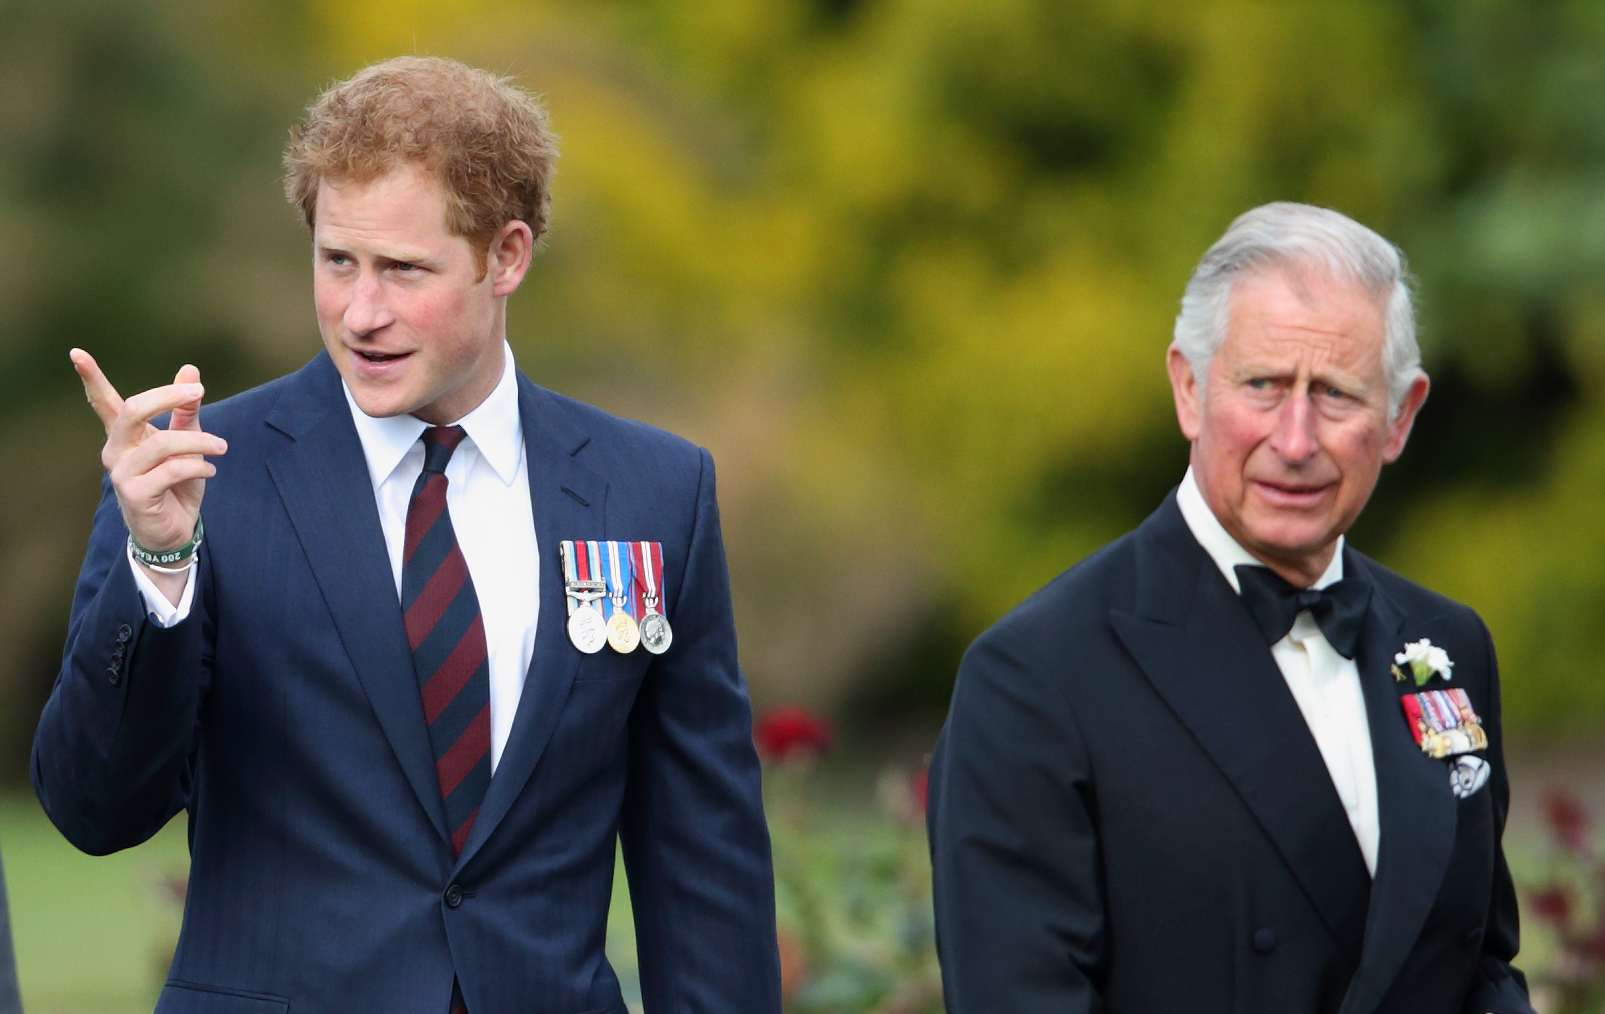 Prince Harry and King Charles, at the Royal Hospital Chelsea on June 9, 2015, in London, England. | Source: Getty Images